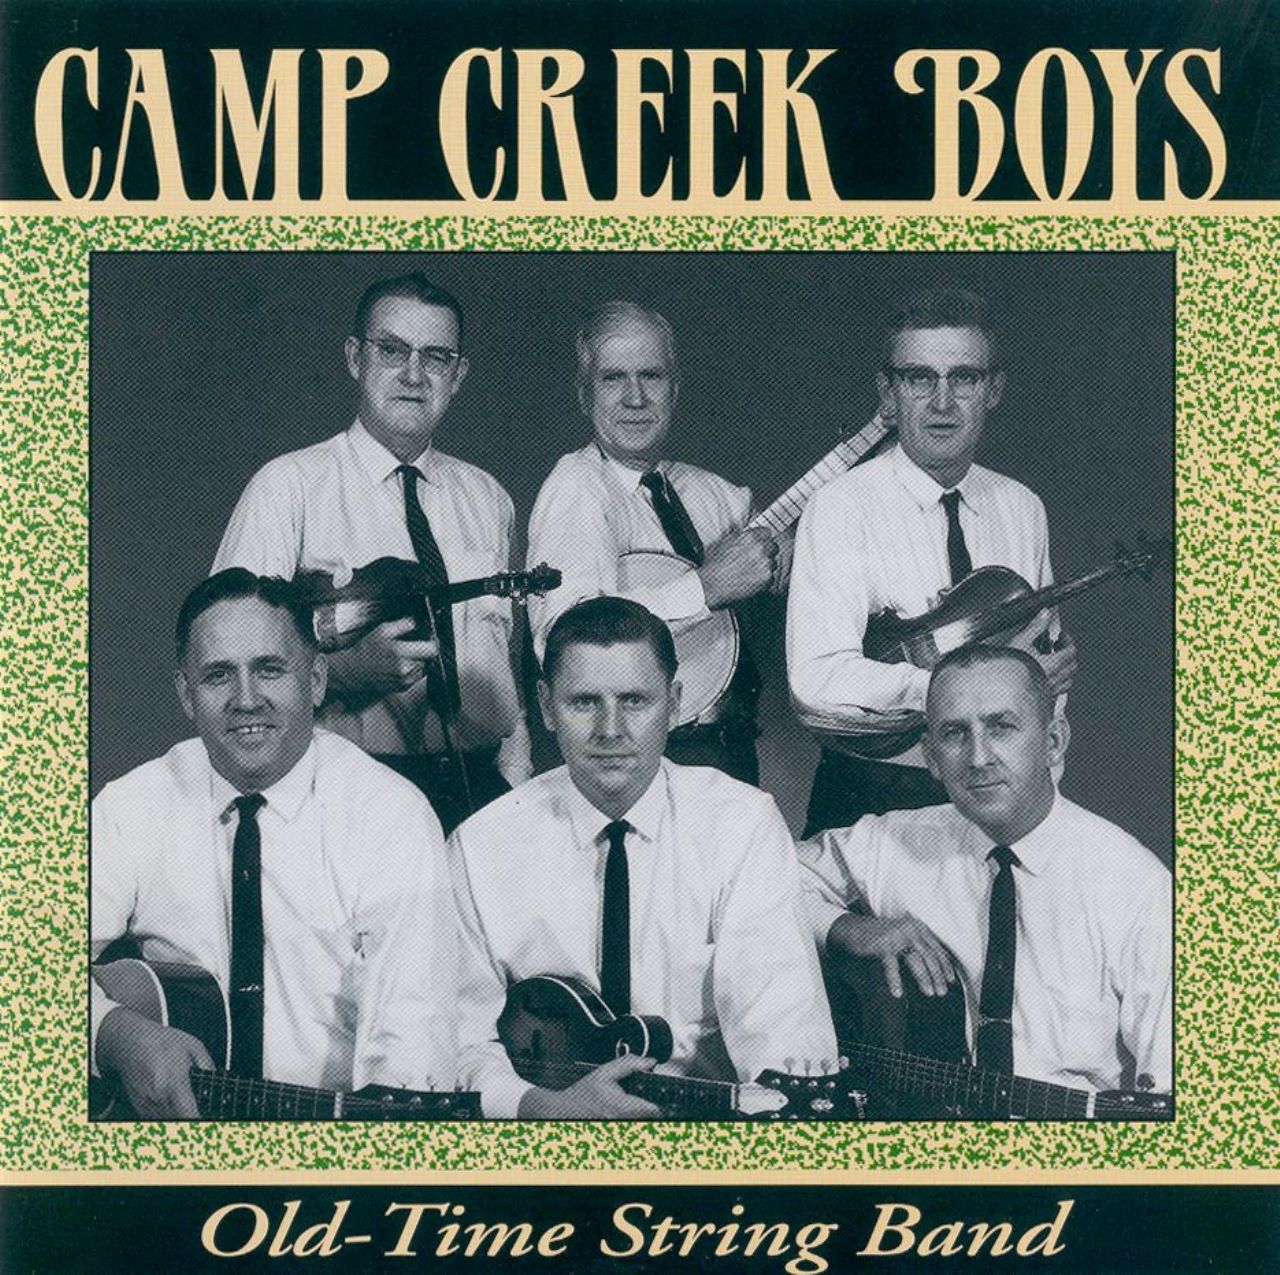 Camp Creek Boys - Old Time String Band cover album